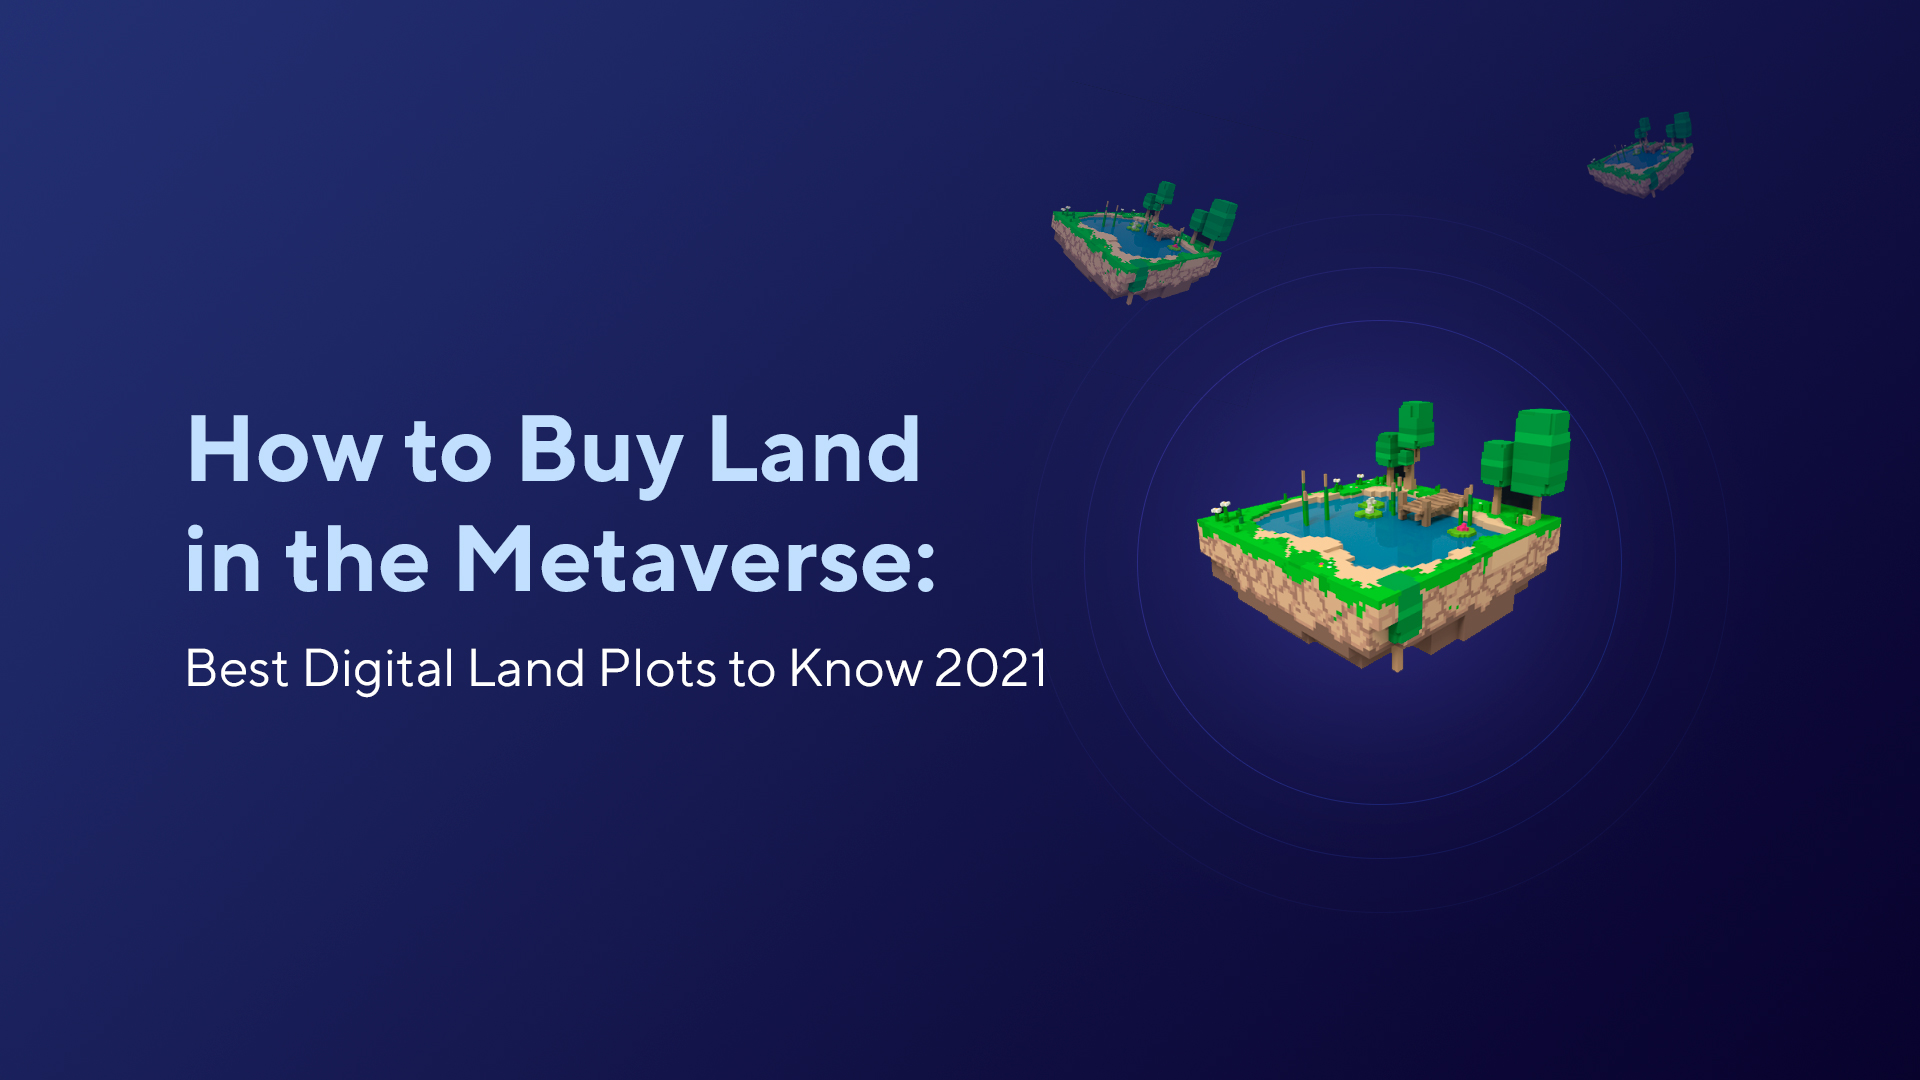 How to Buy Land in the Metaverse: Best Digital Land Plots to Know 2021